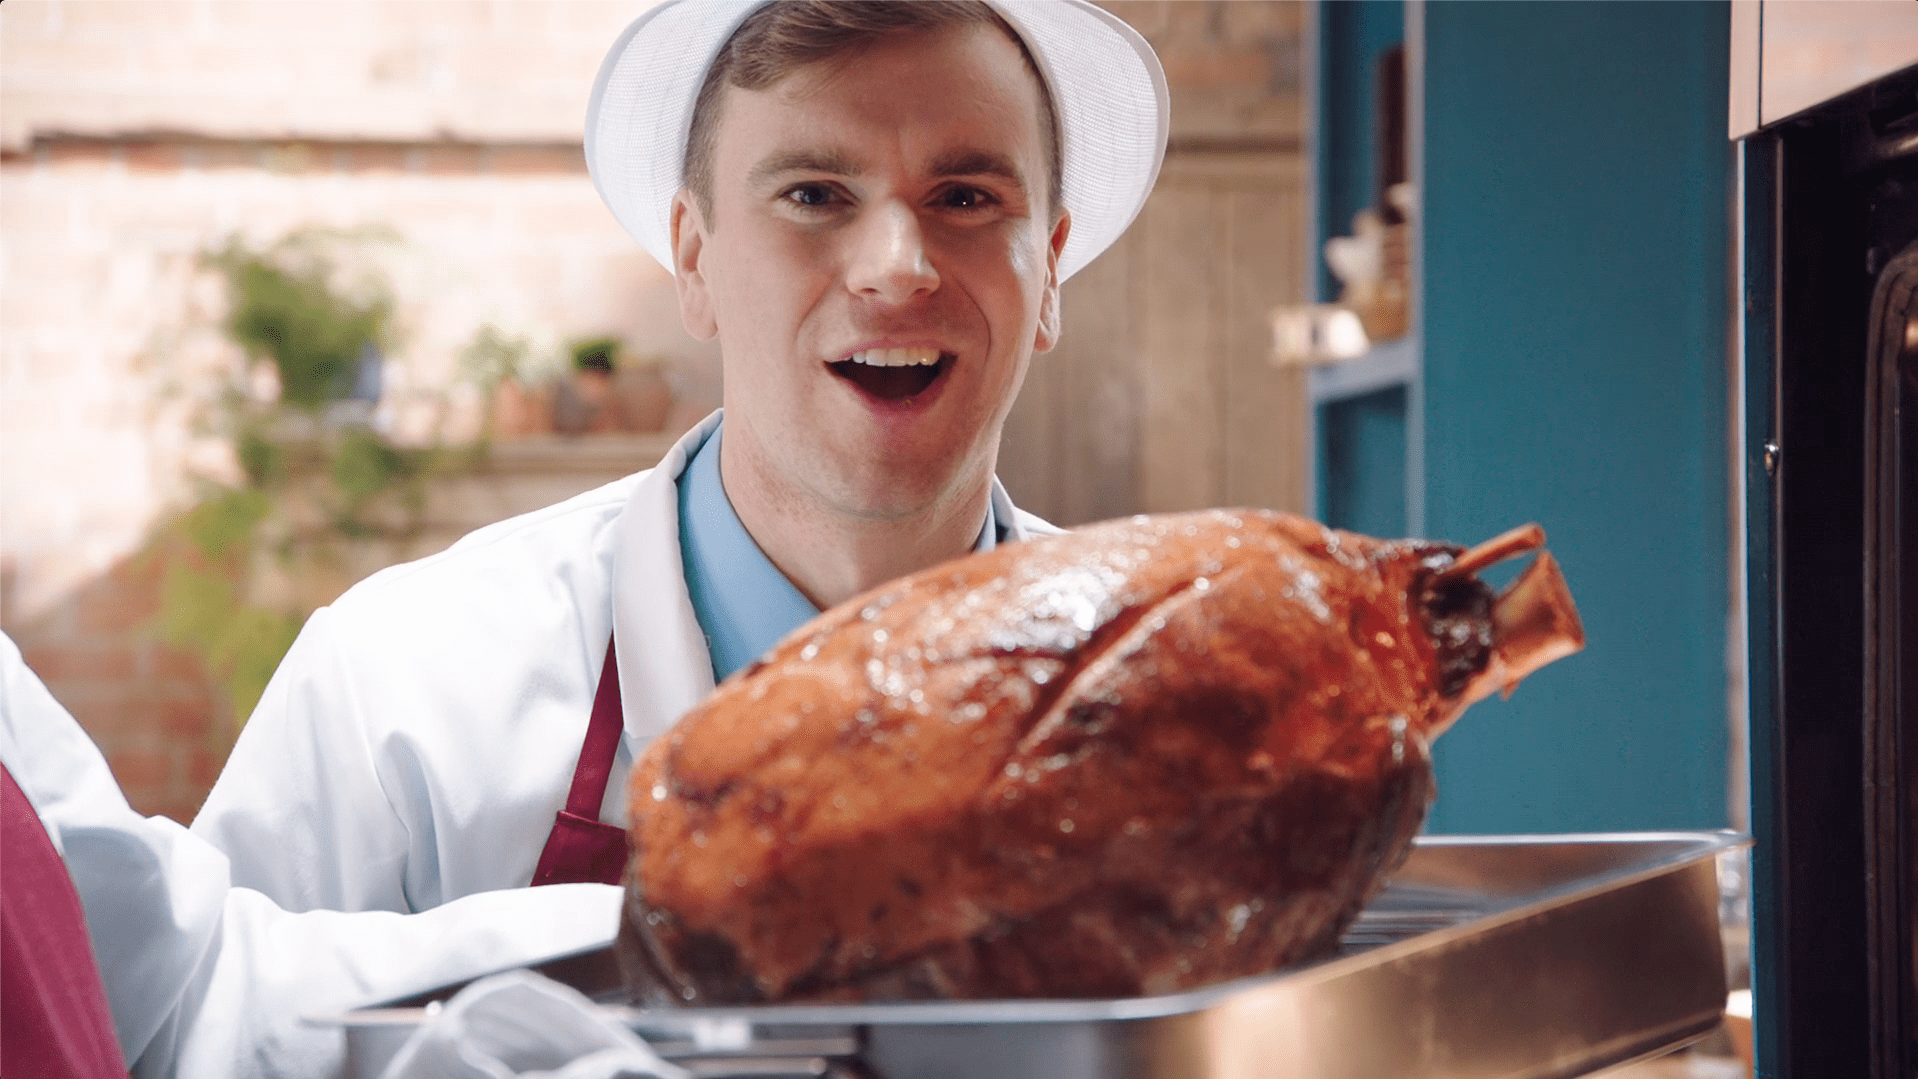 Brady's Family Ham has launched a new marketing campaign, "Your only ham"